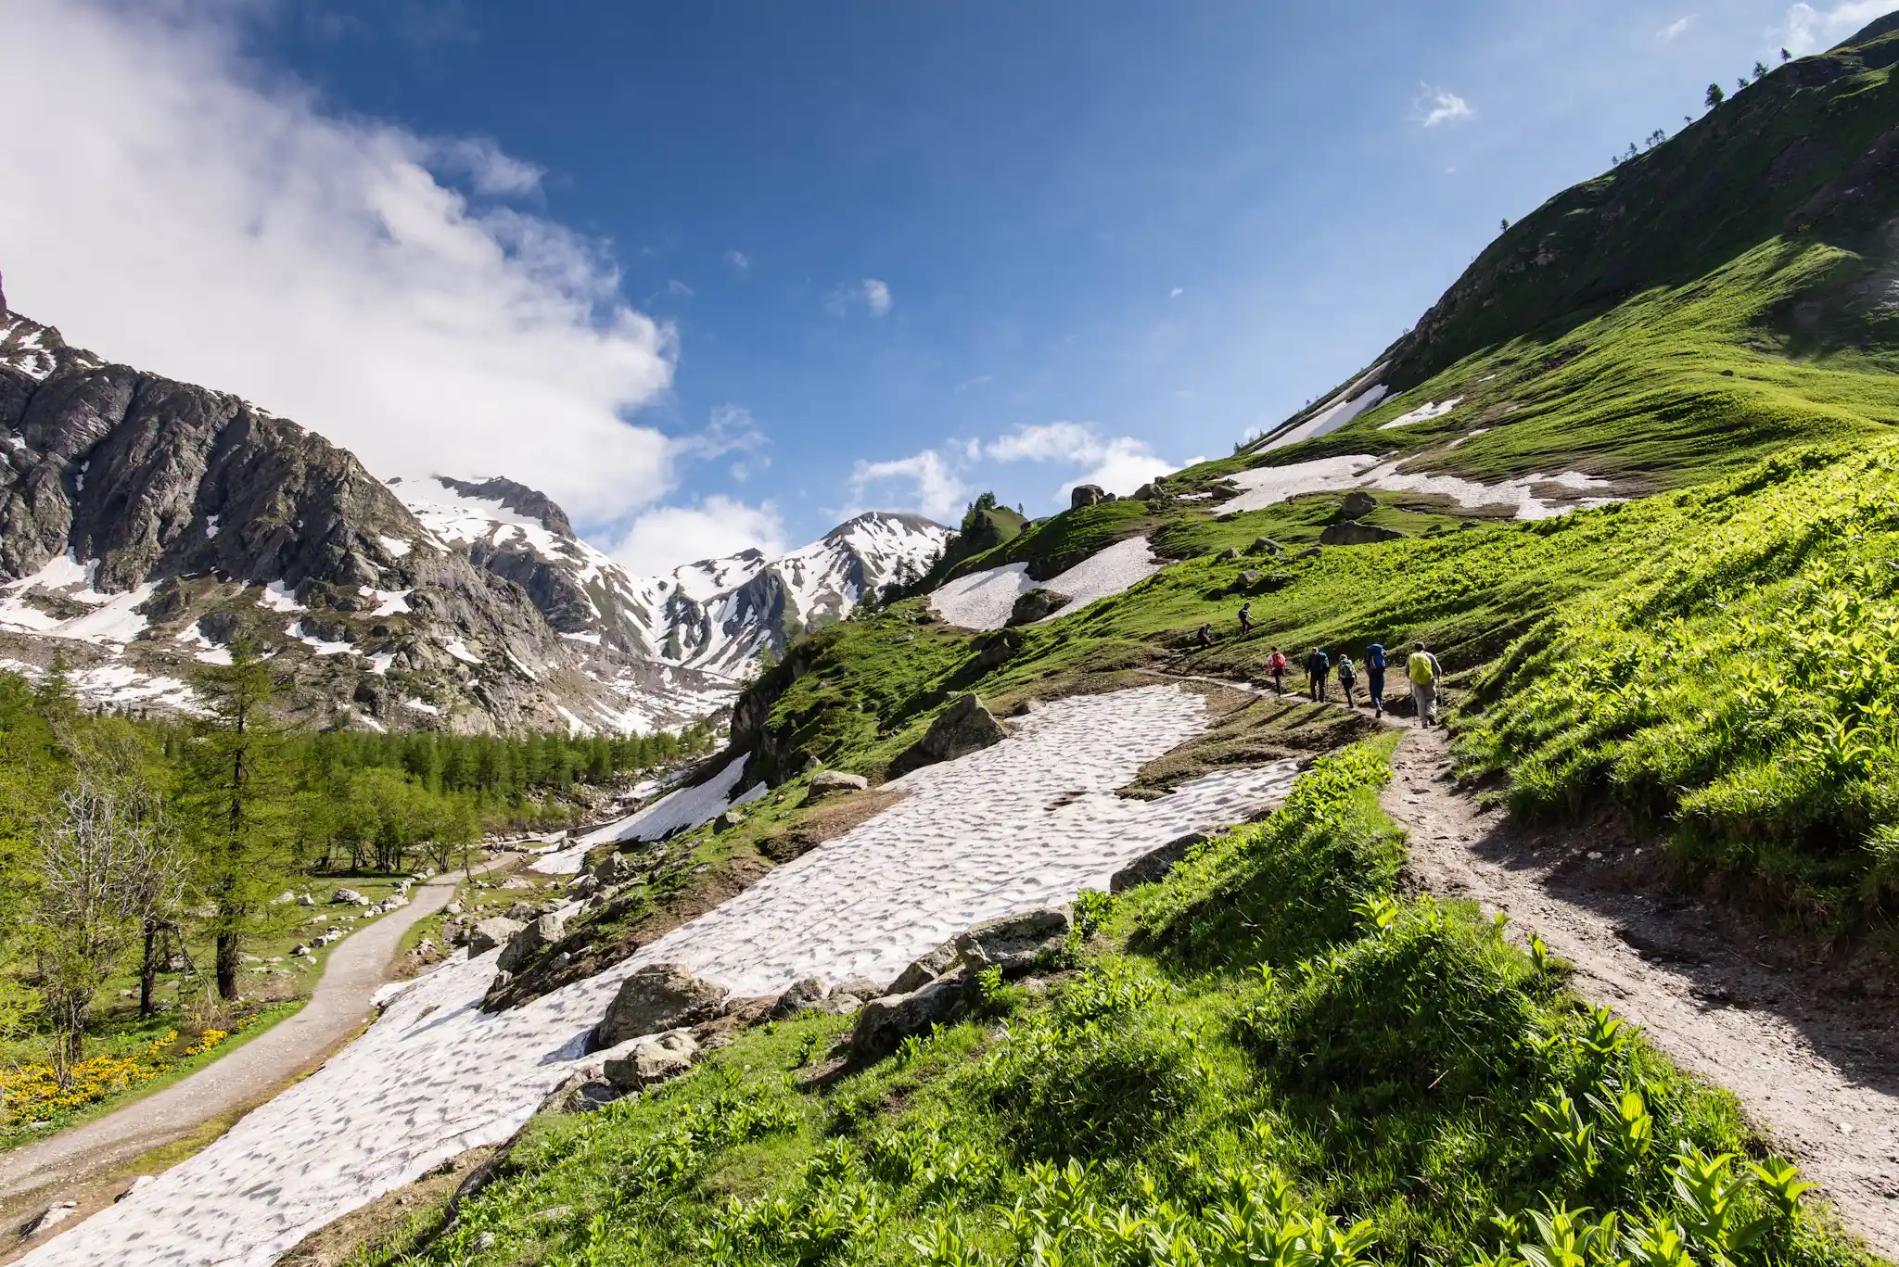 Continuing on through the Val Ferret. Photo: Getty.